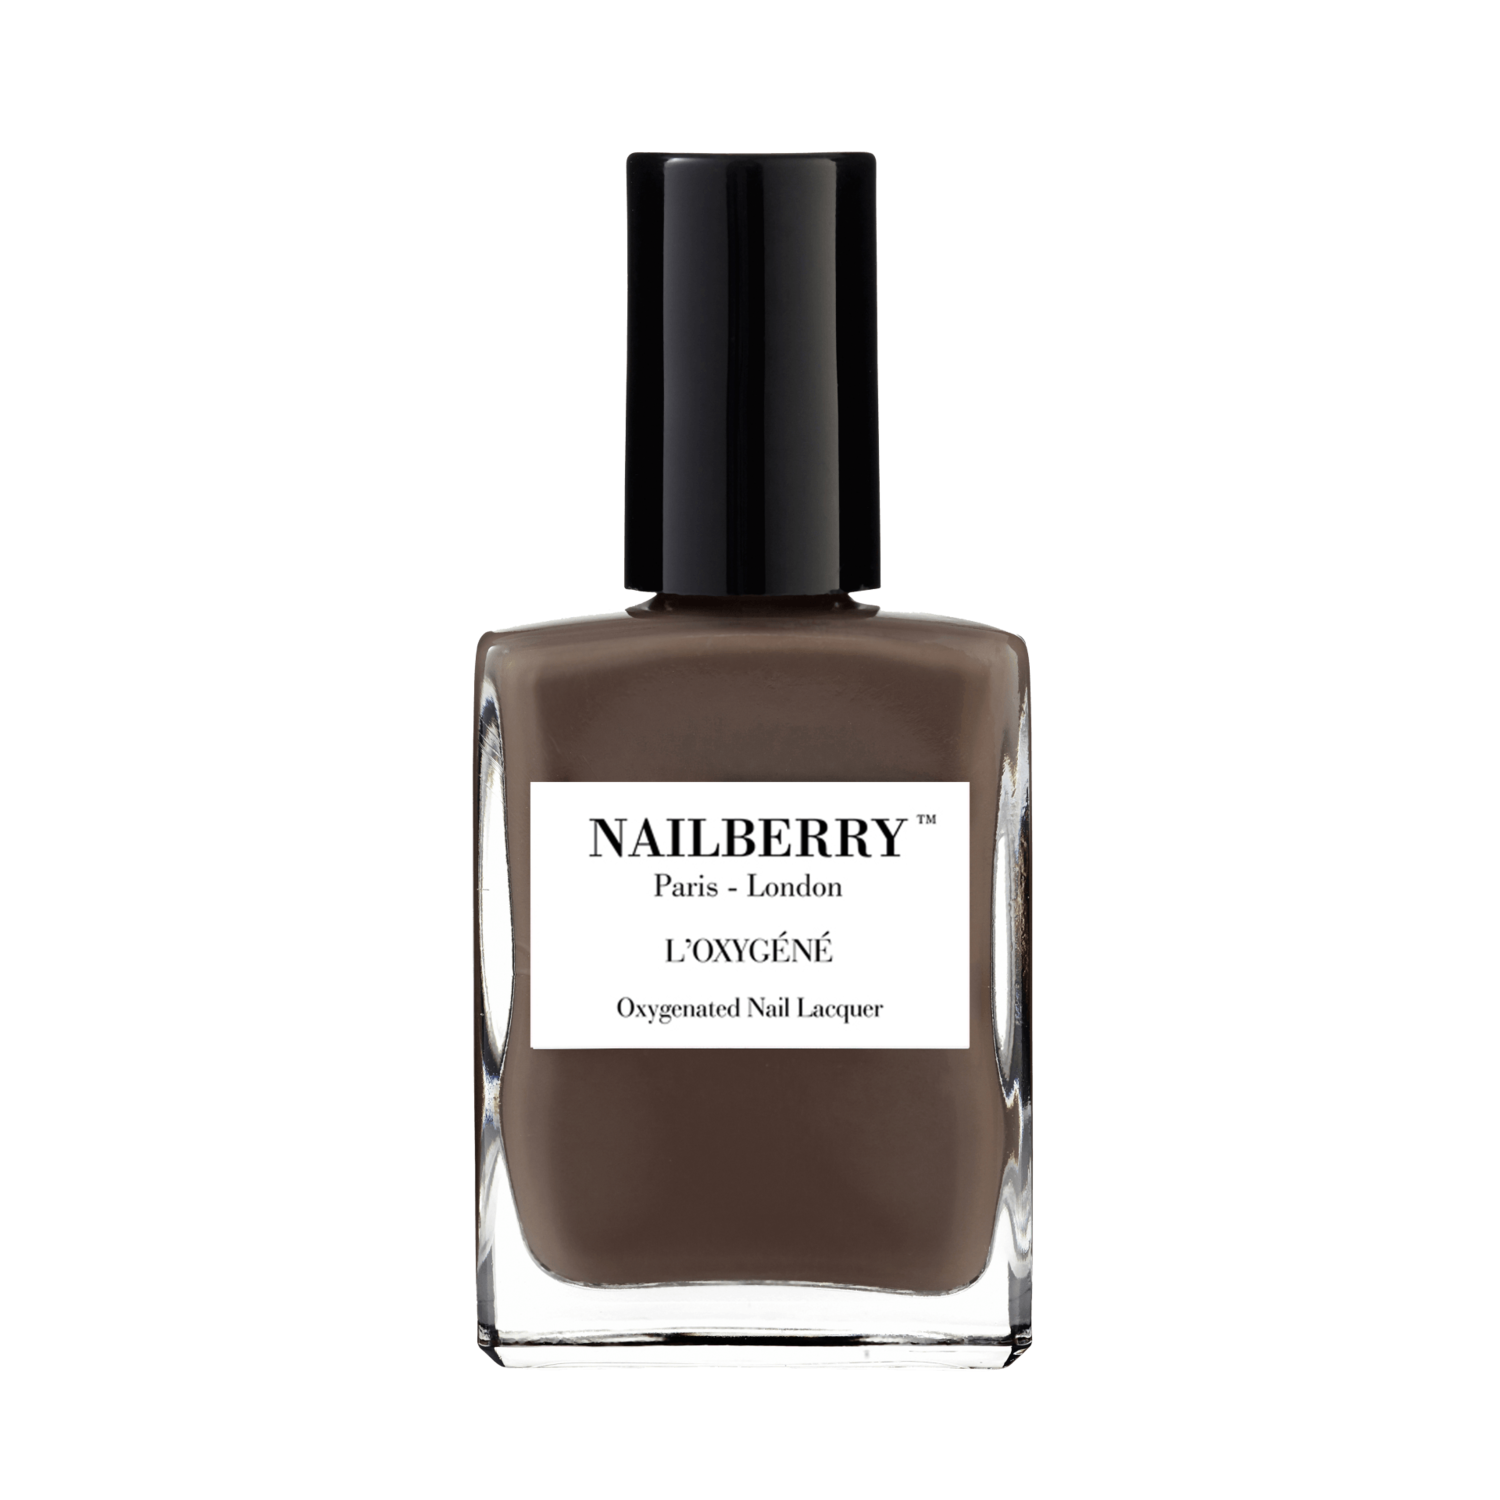 NAILBERRY - Taupe La